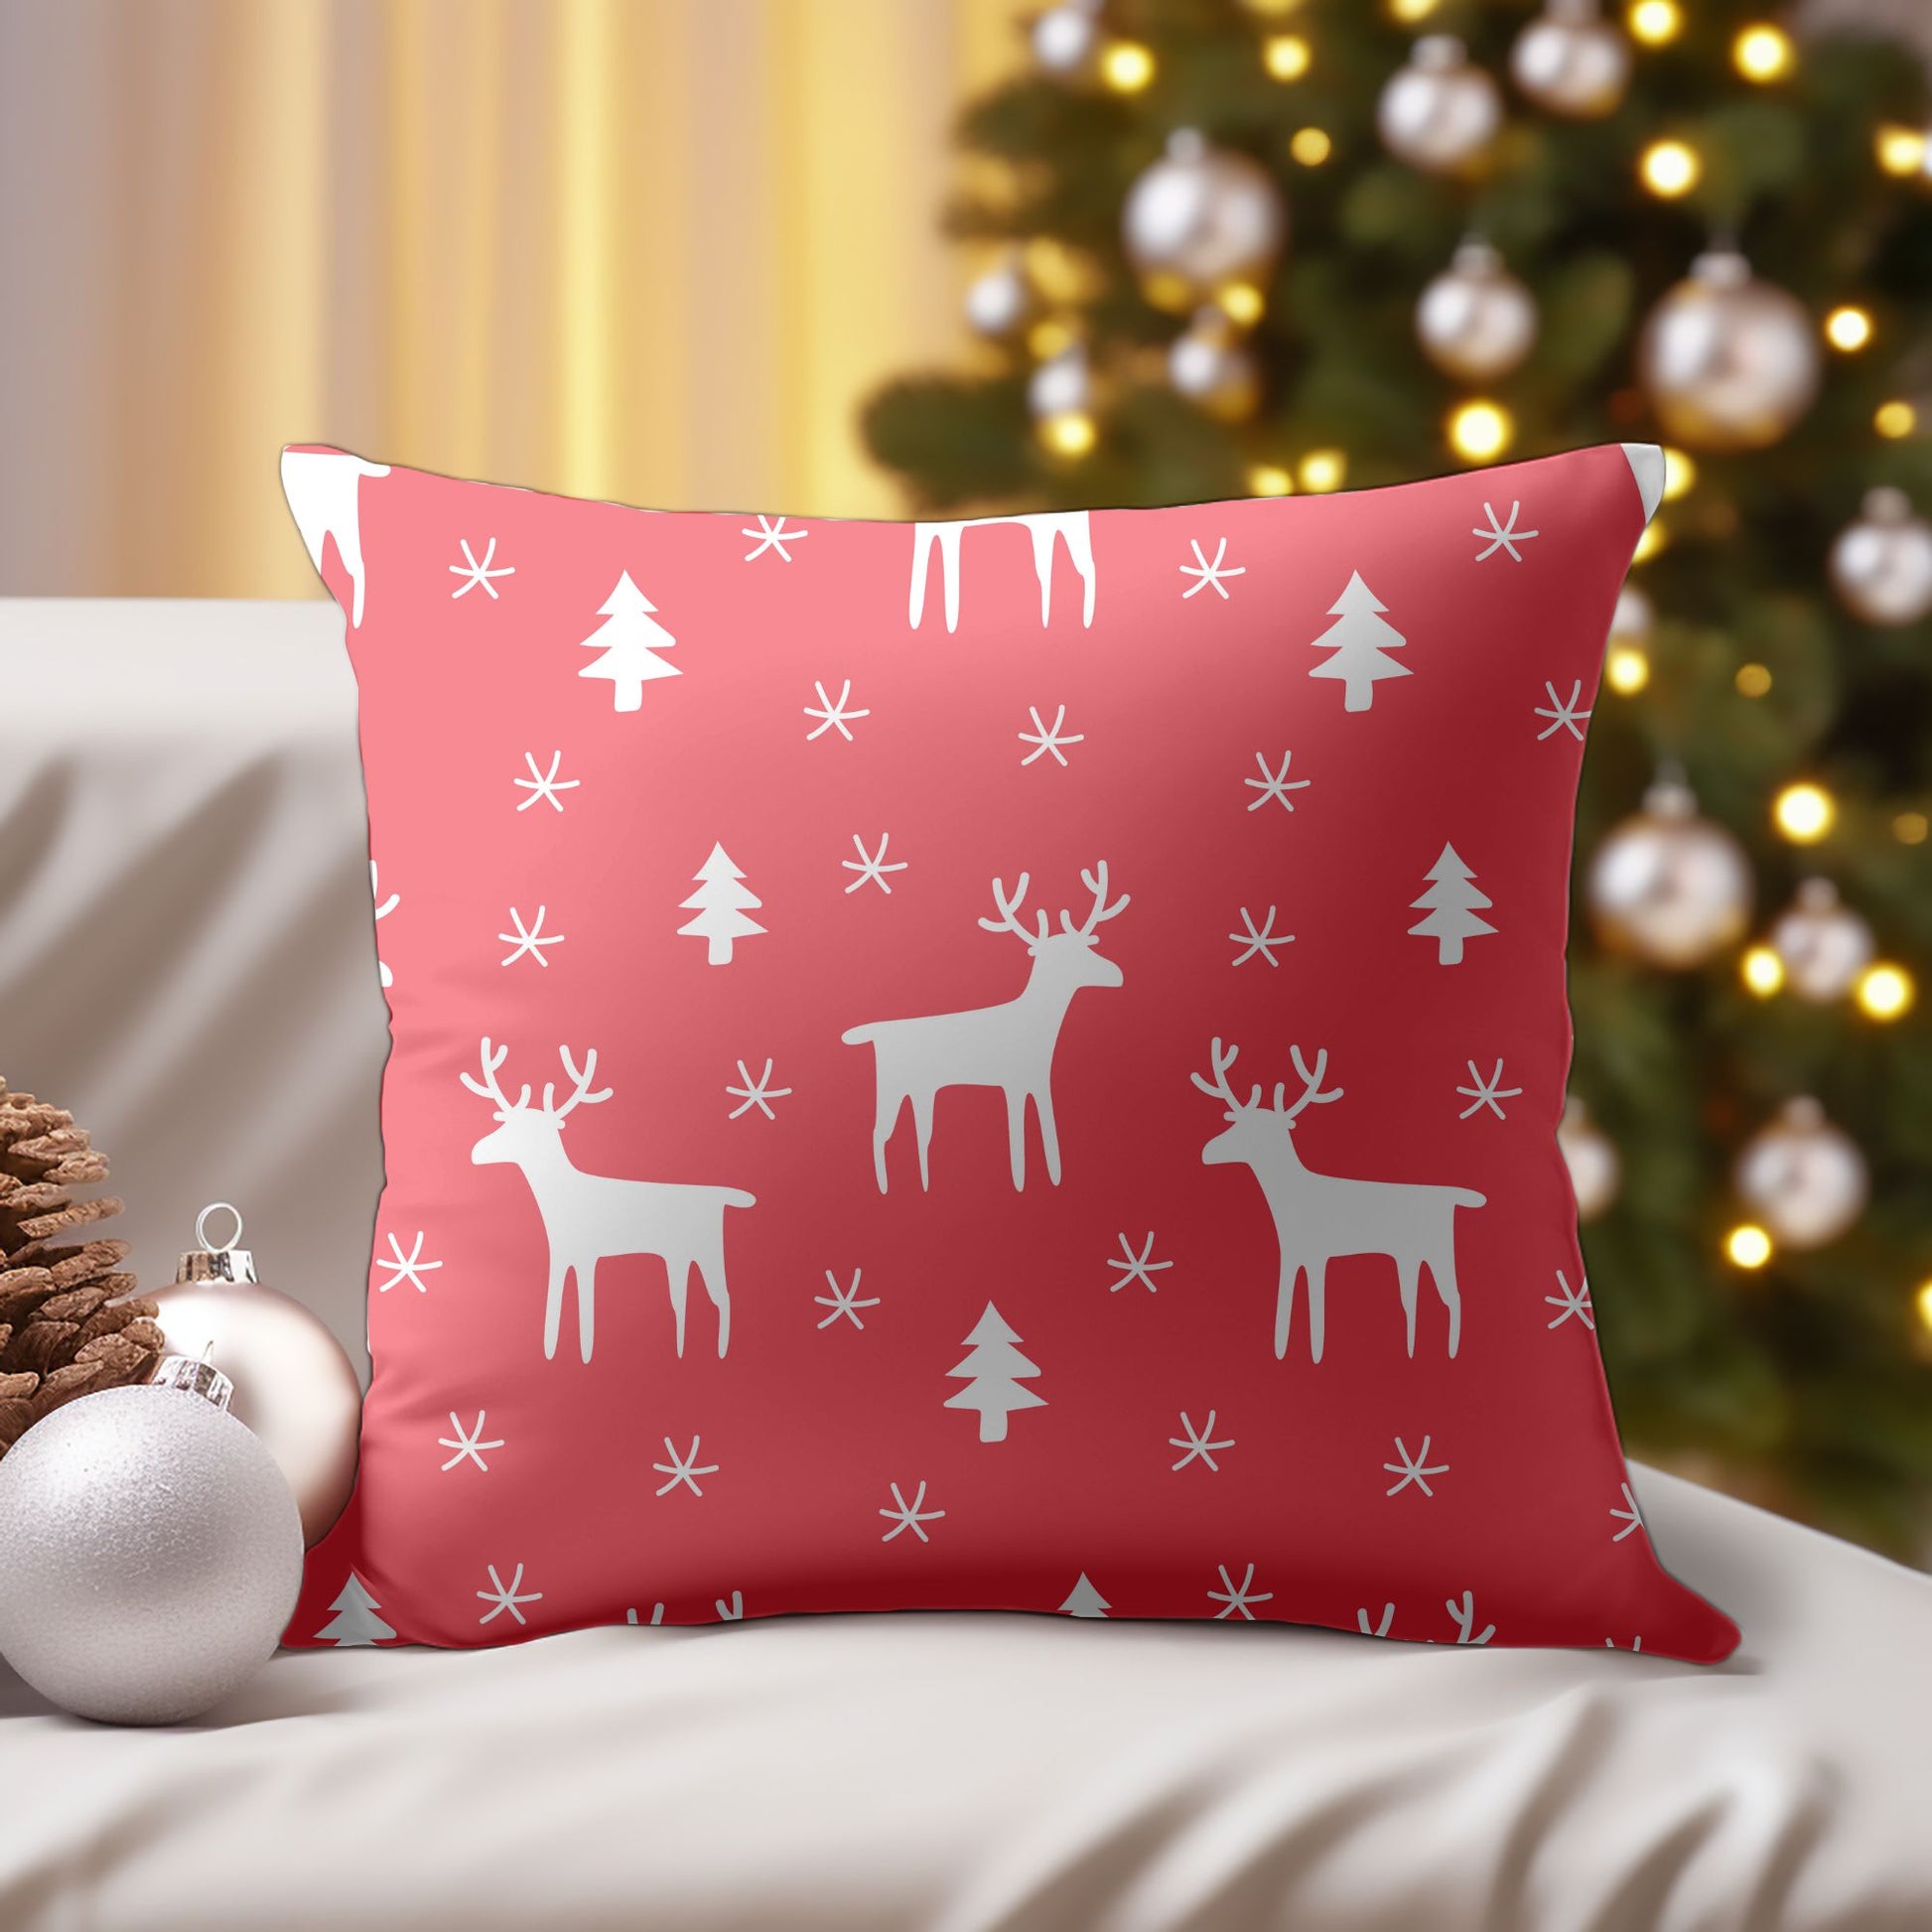 Holiday Cheer in a Decorative Pillow